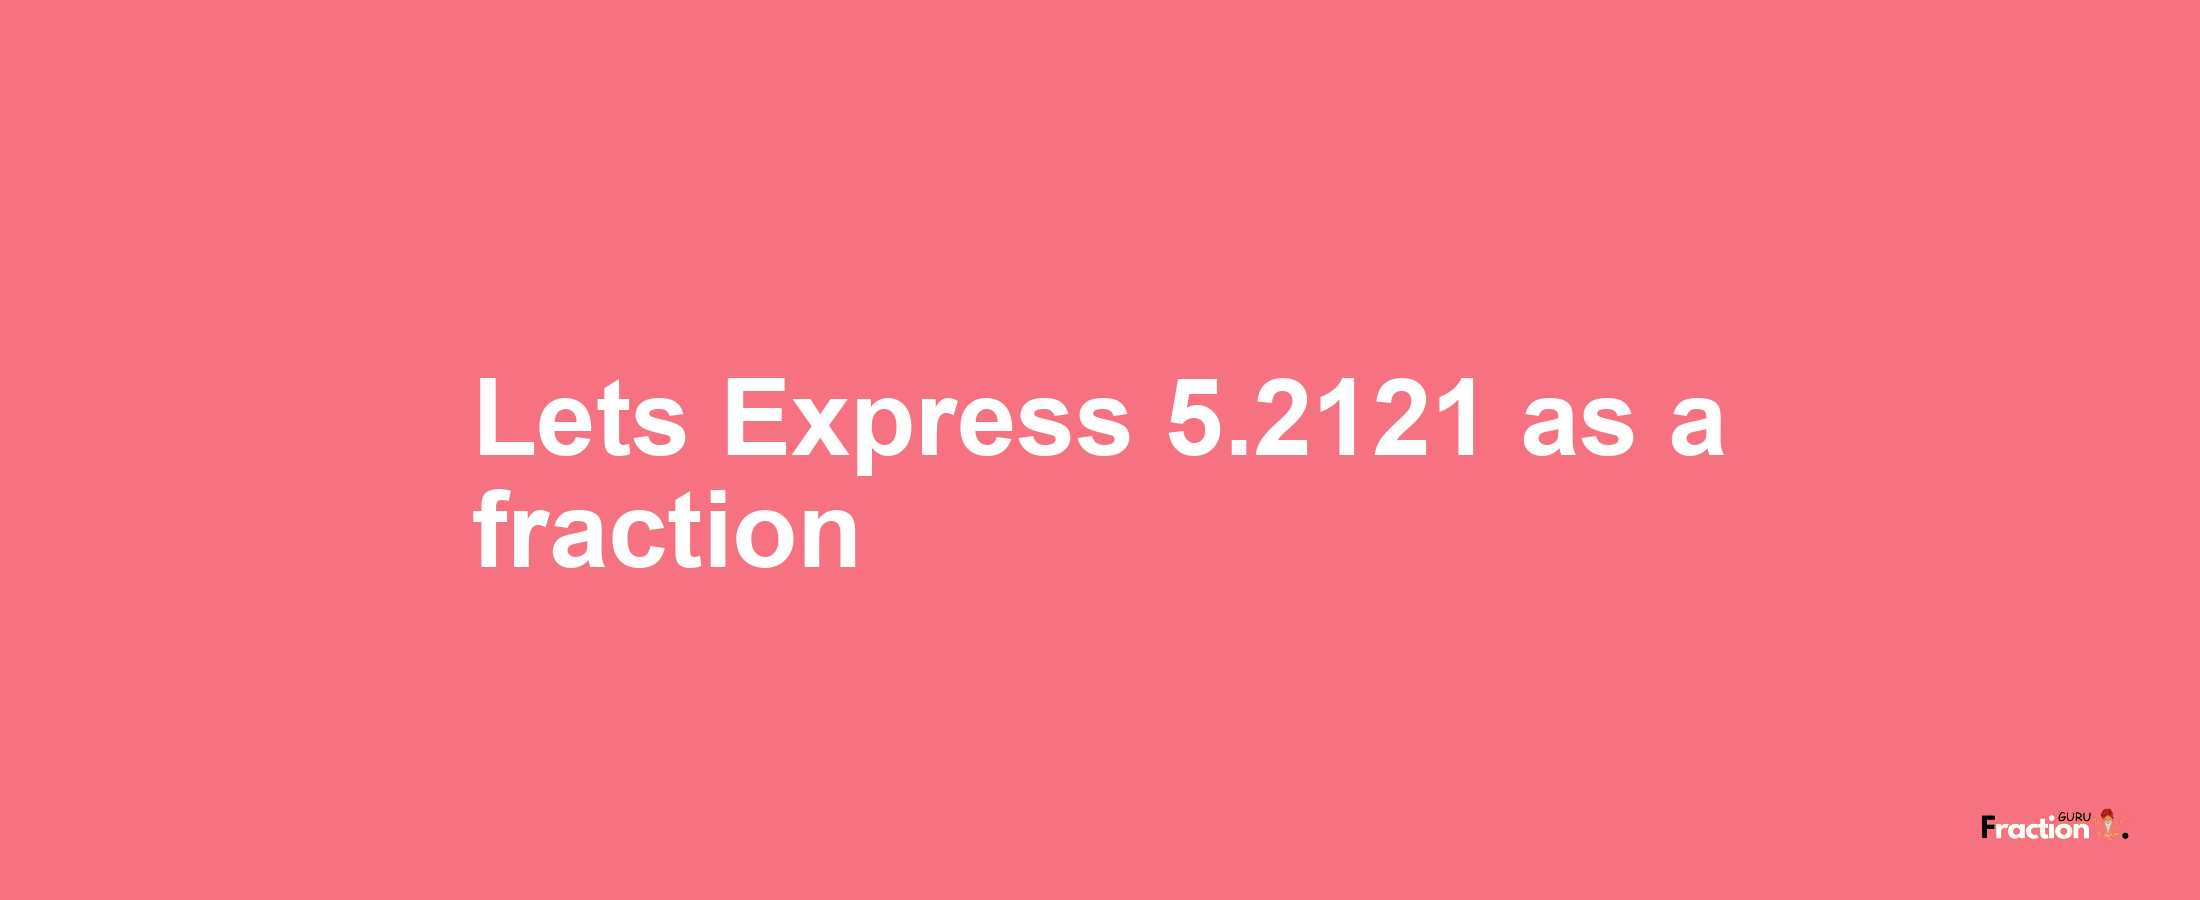 Lets Express 5.2121 as afraction